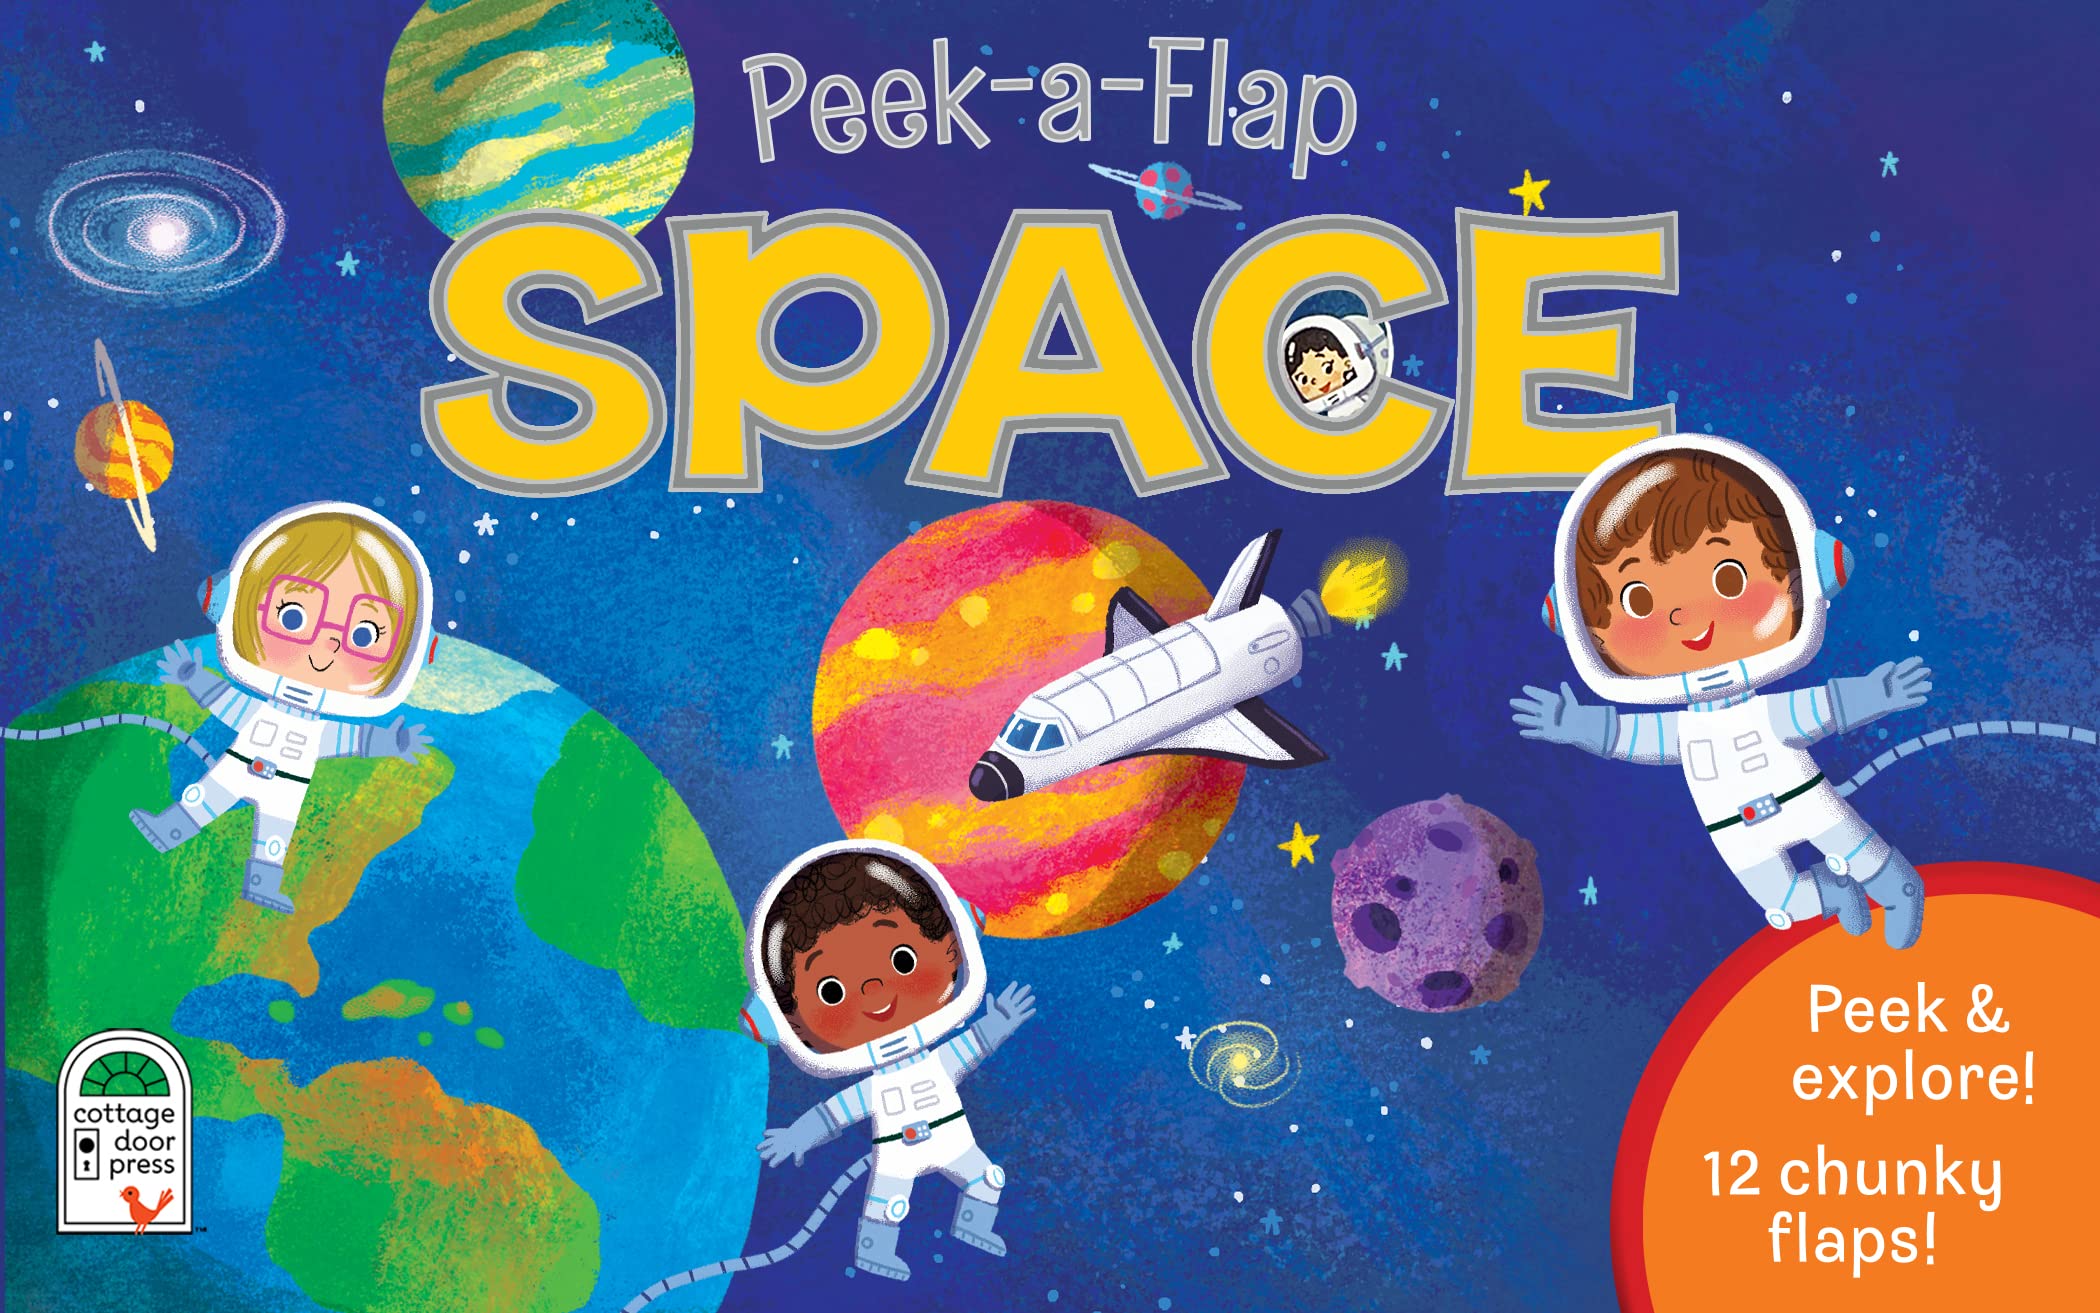 Peek-a-Flap Space Children's Lift-a-Flap Board Book - Planets, Solar System, Outer Space, Rockets & More